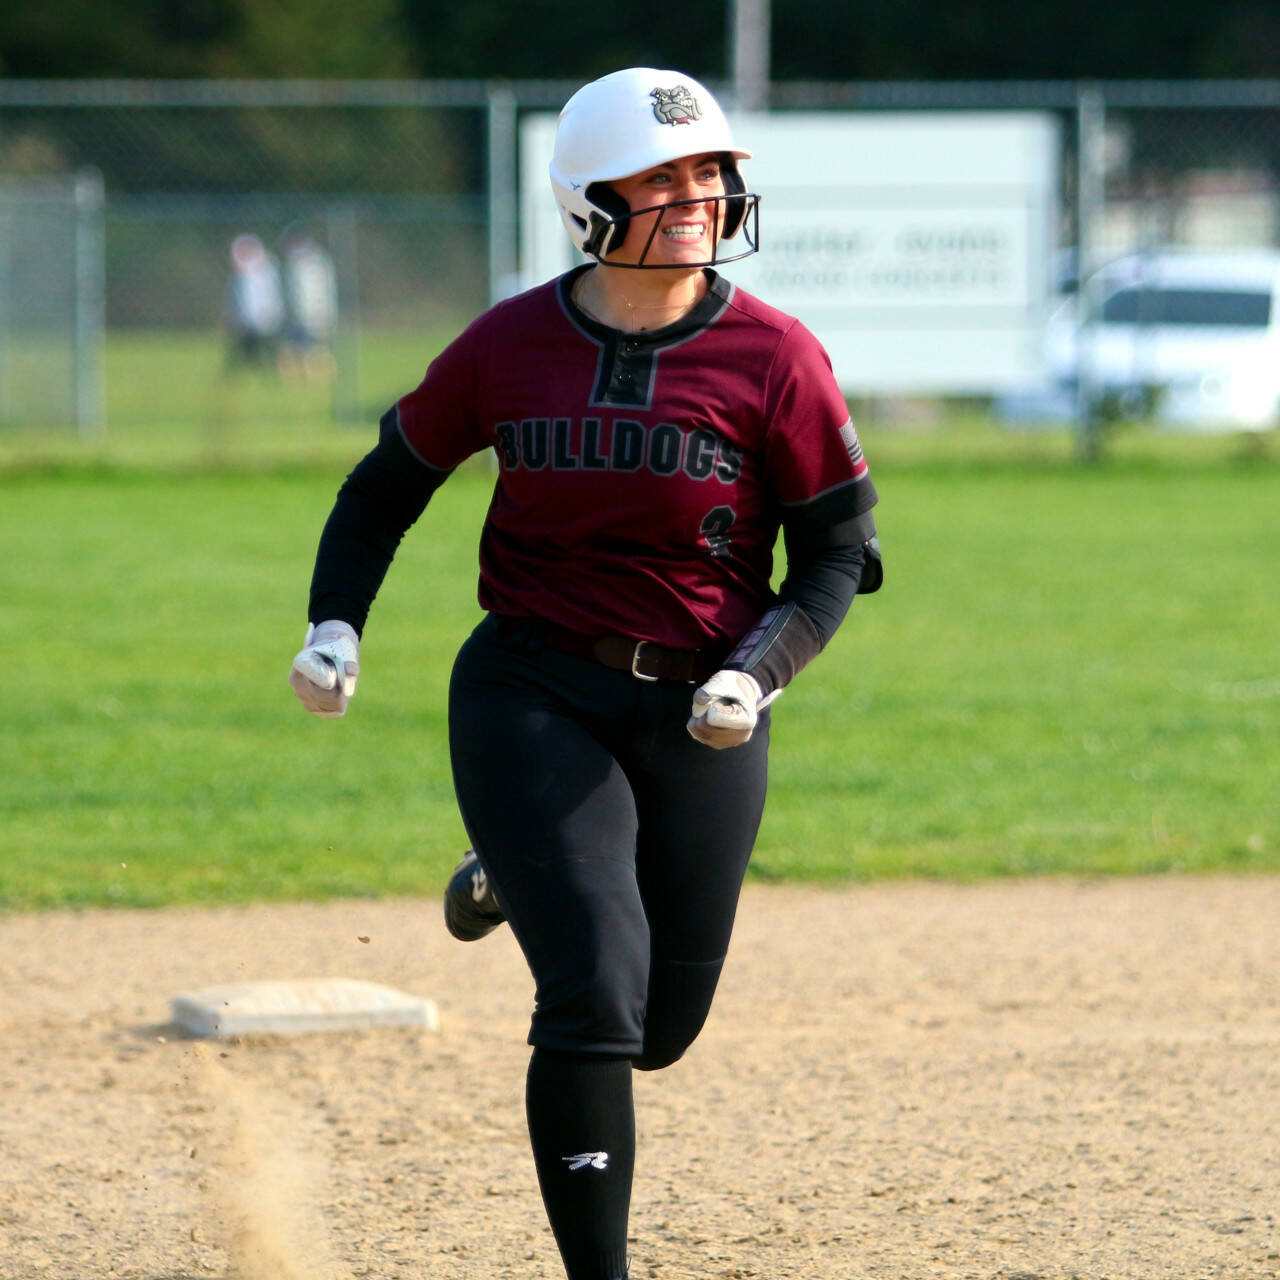 RYAN SPARKS | THE DAILY WORLD Montesano catcher Ali Parkin heads to third after belting a three-run home run in the top of the seventh inning of the Bulldogs’ 8-7 win on Monday in Elma.